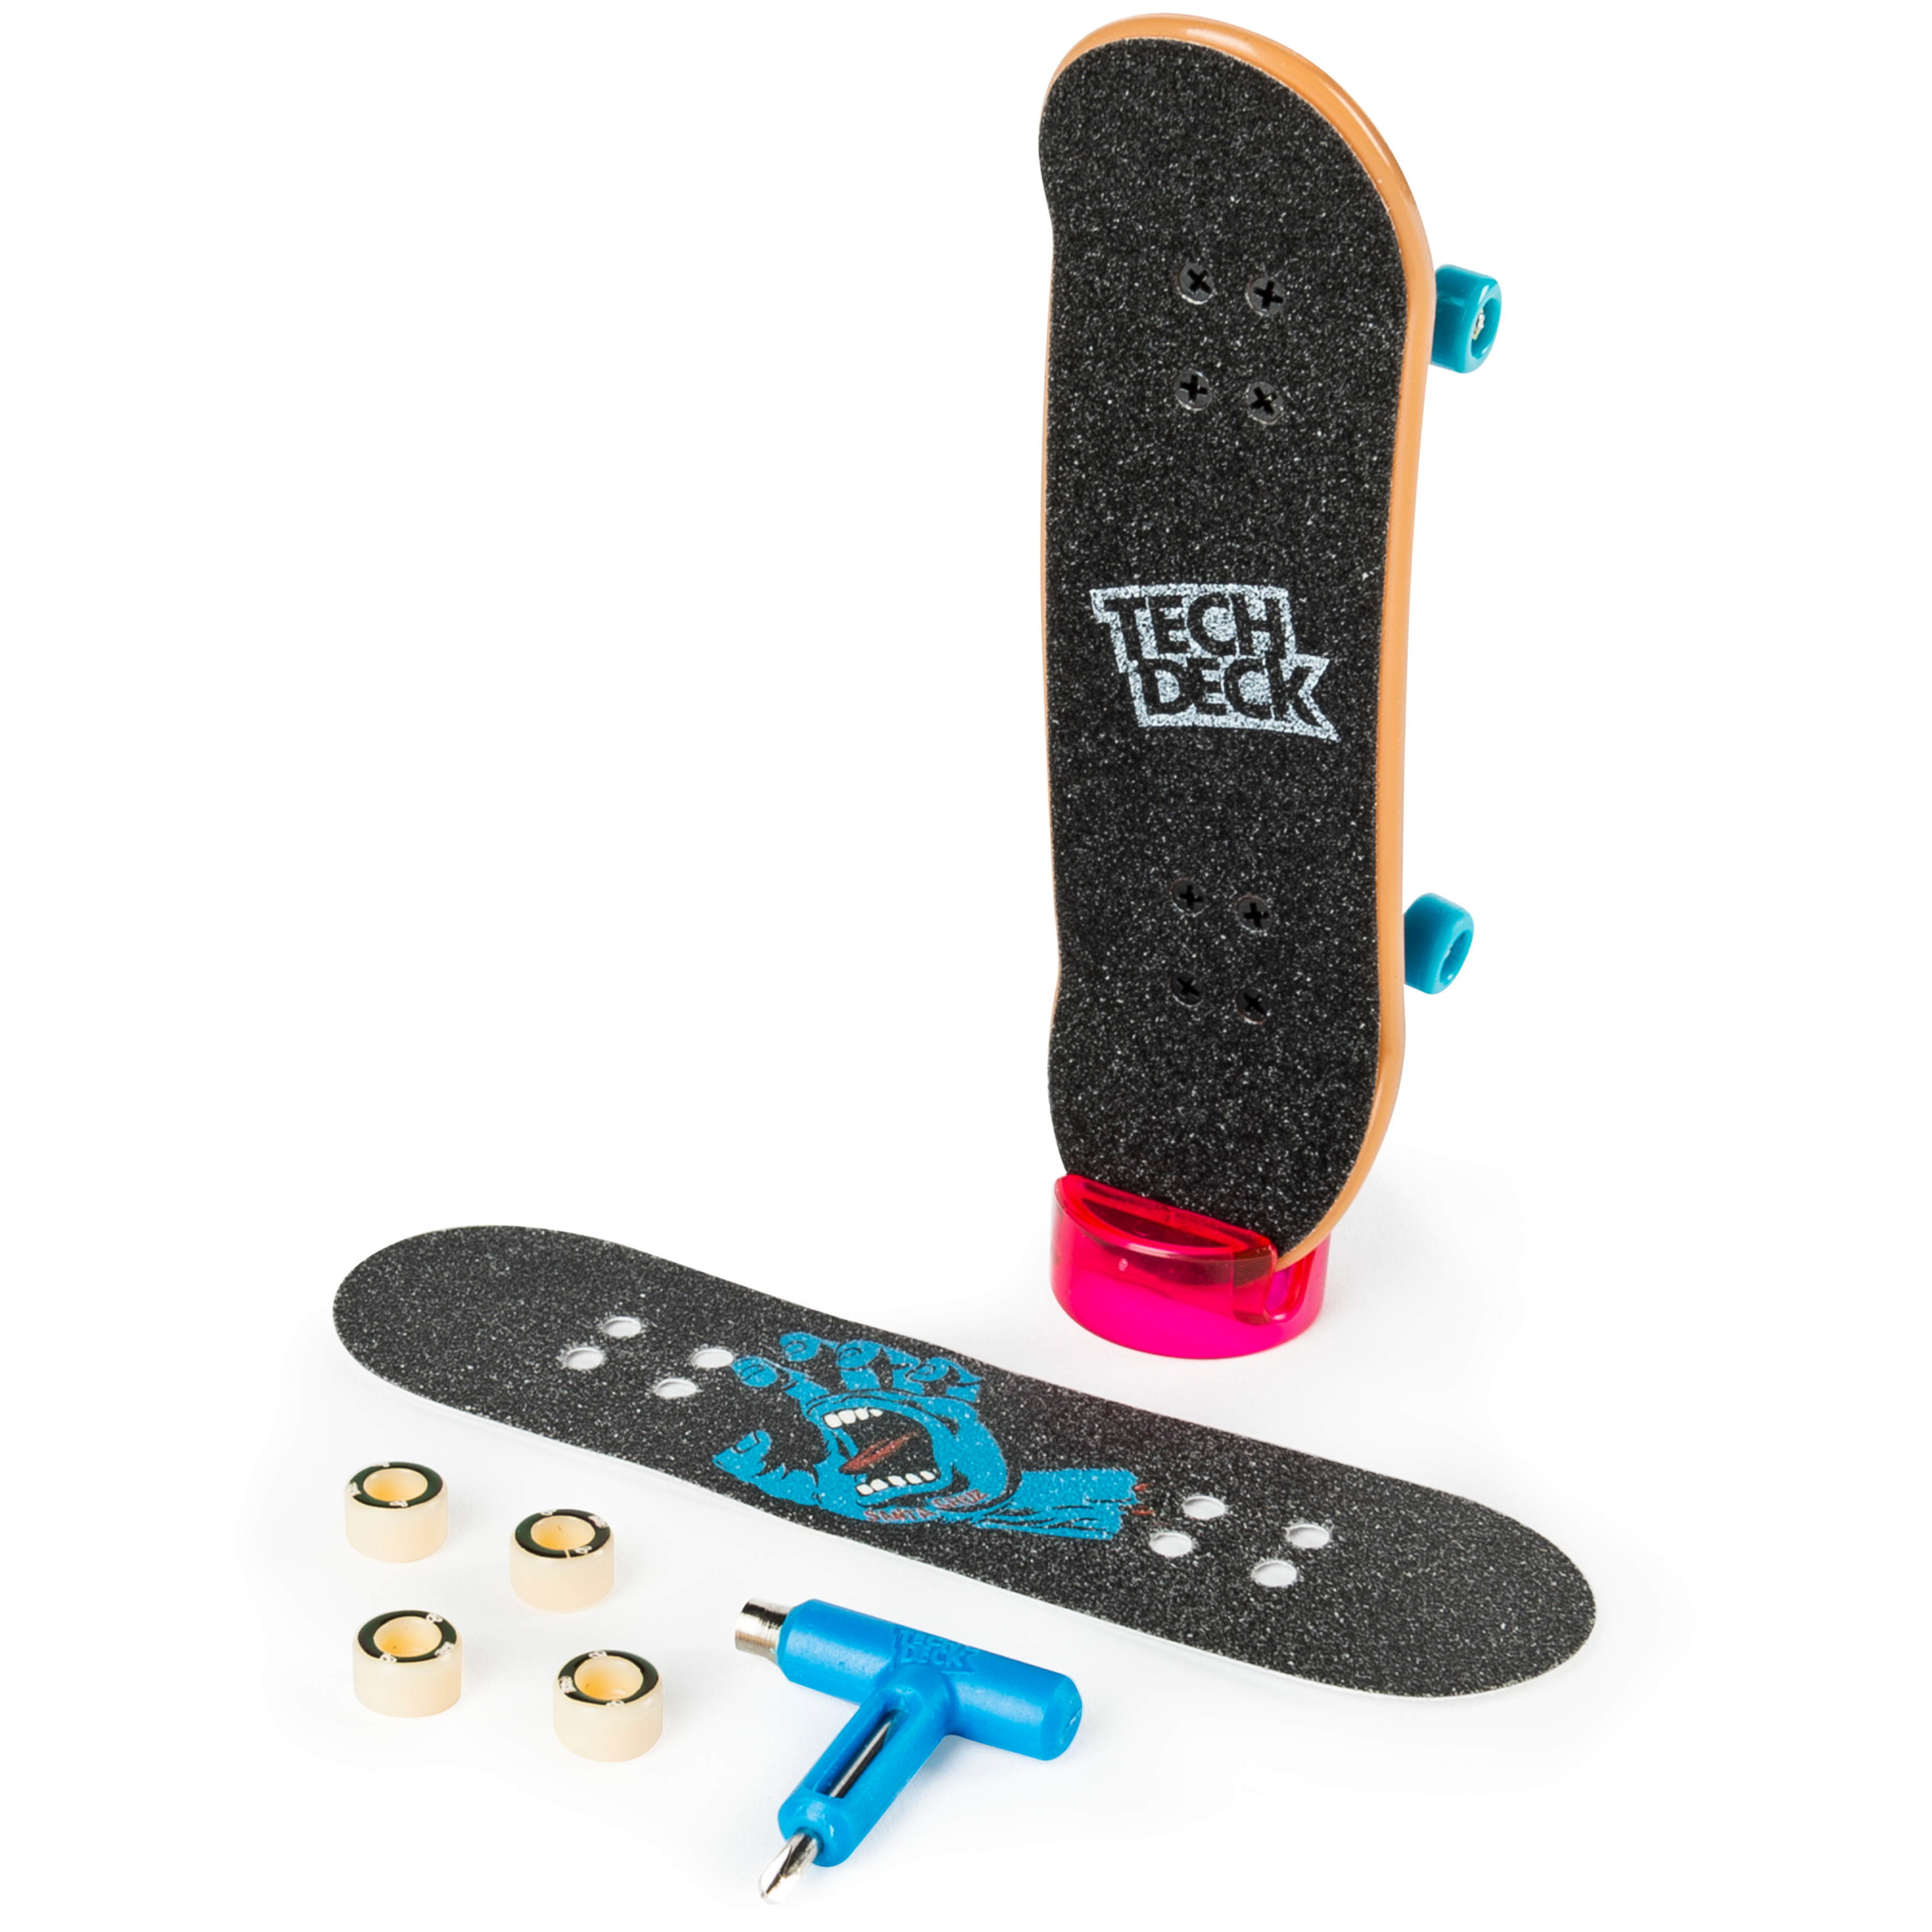 Tech Deck, 96mm Fingerboard Mini Skateboard with Authentic Designs, For Ages 6 and Up (Styles May Vary) - image 1 of 8